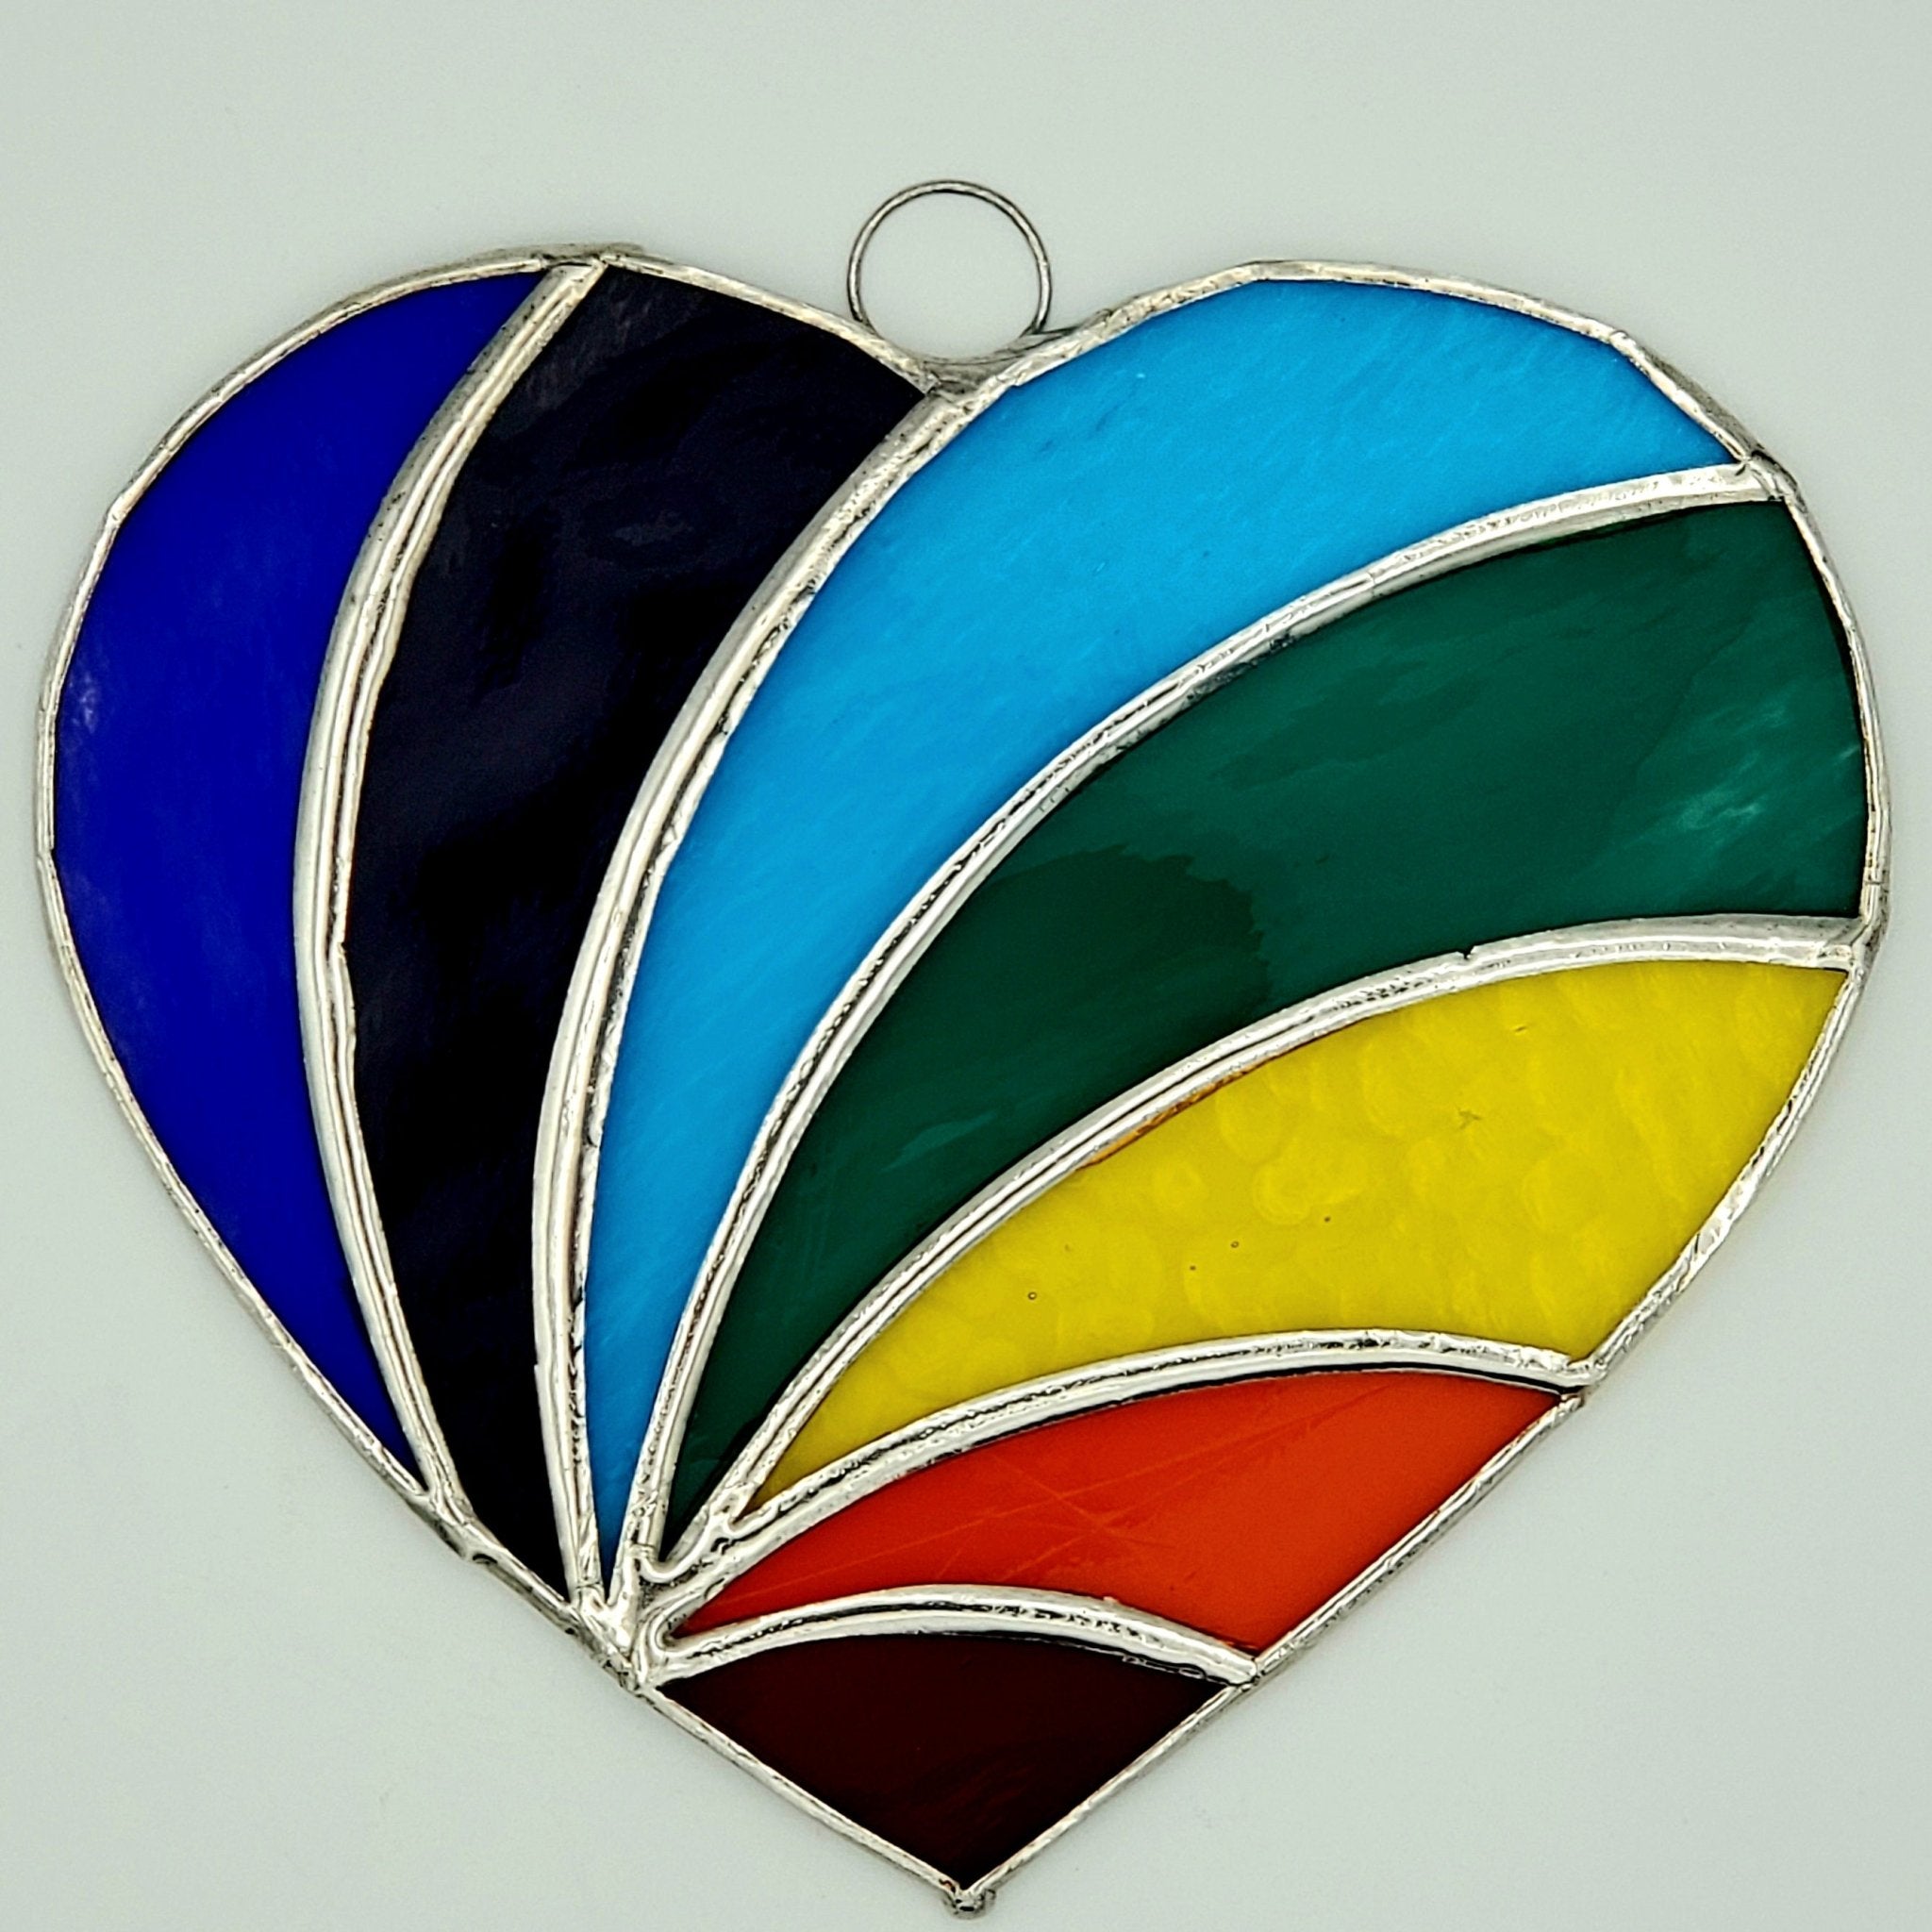 Rainbow Heart Stained Glass - Spiral Circle